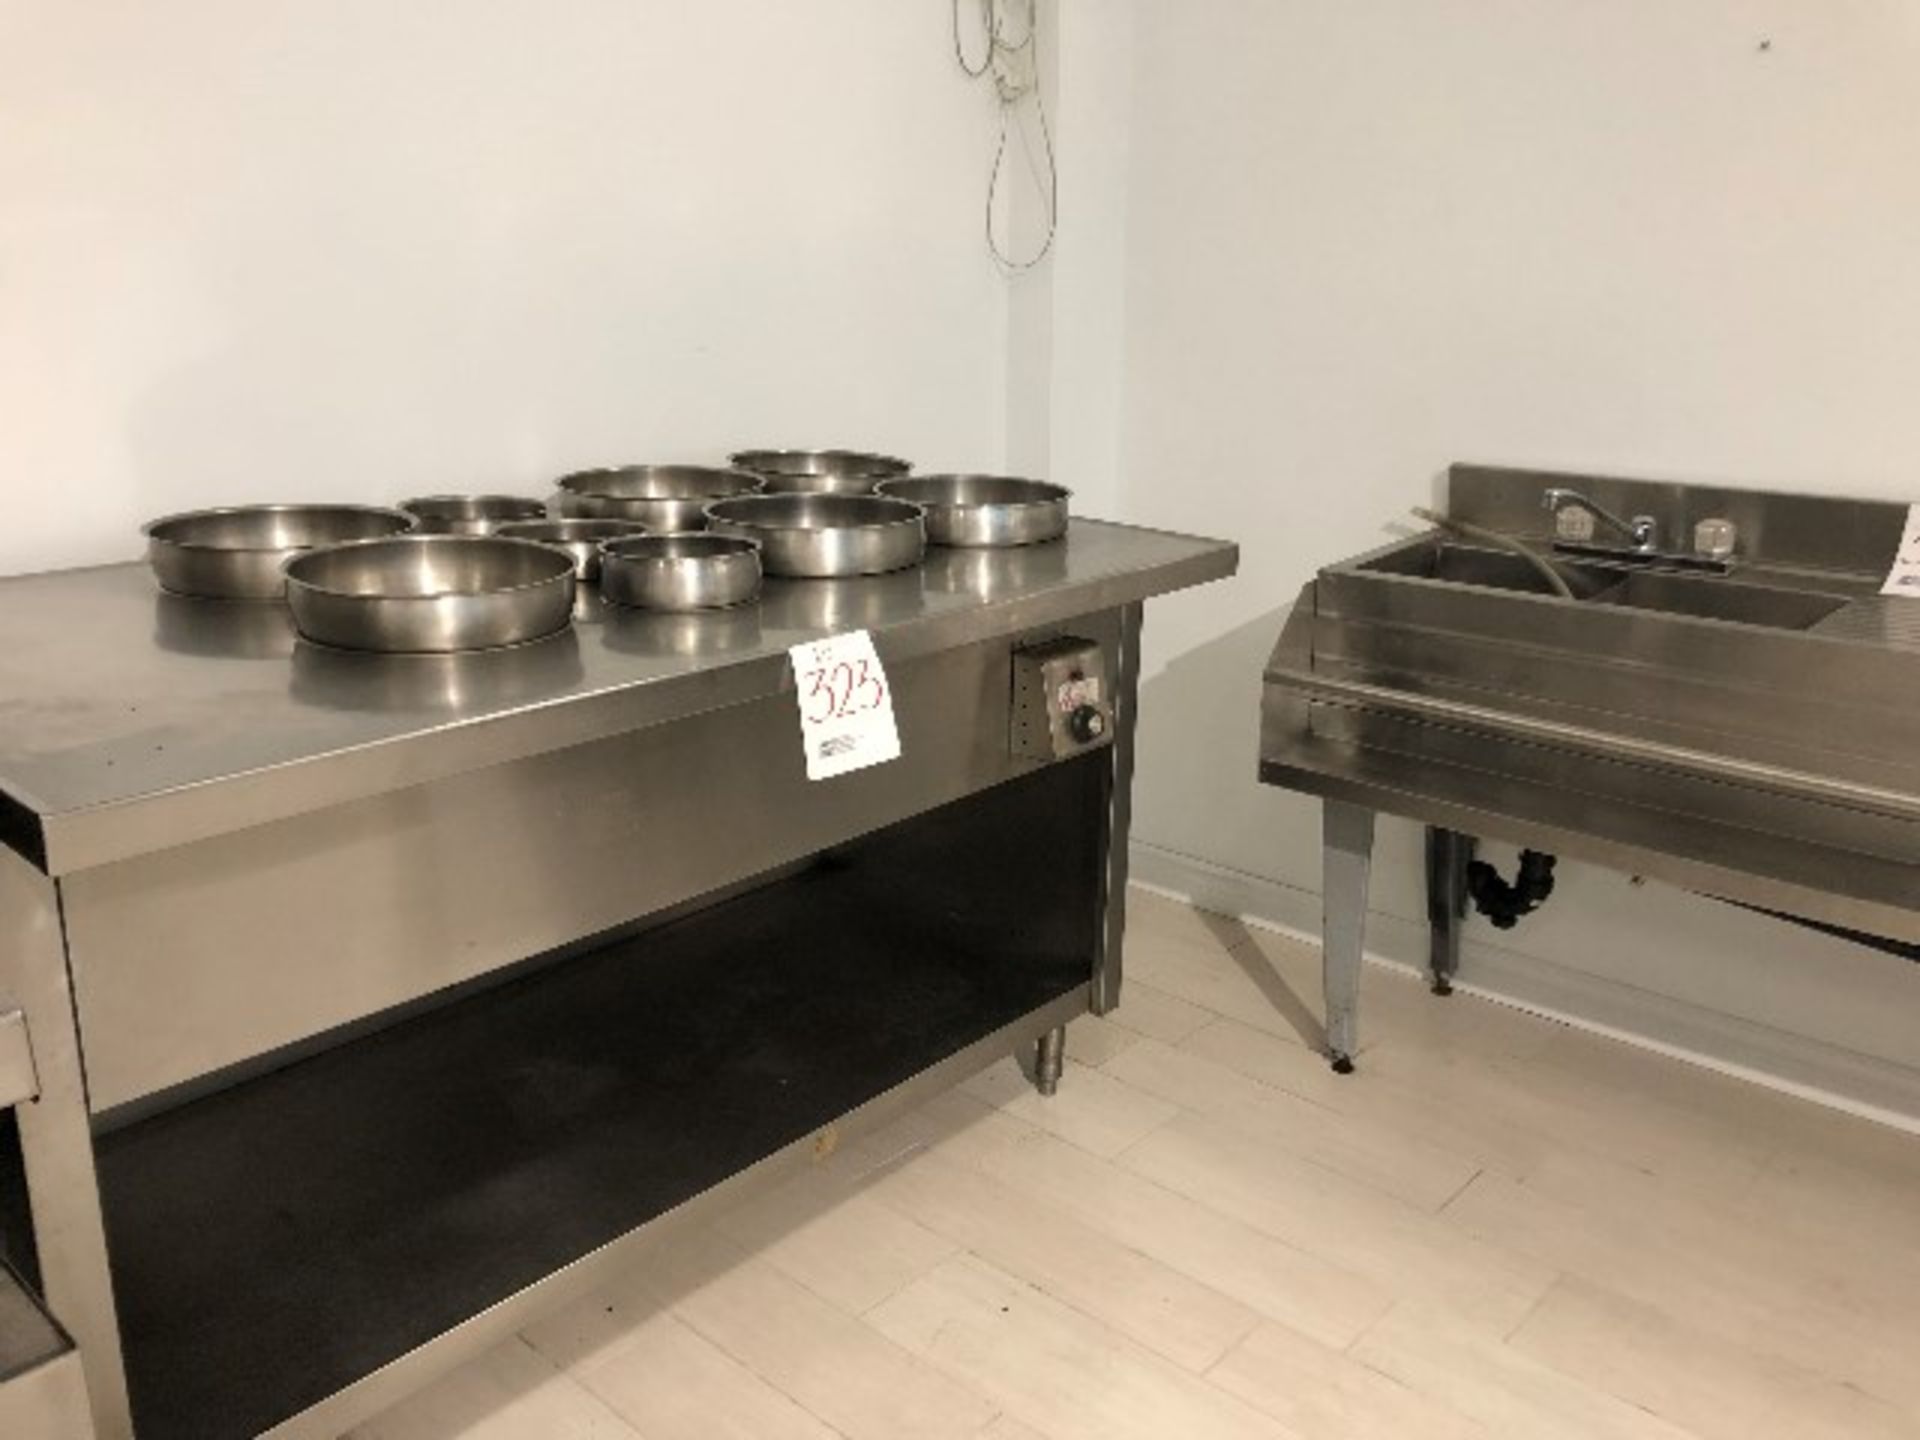 Stainless steel steam table, 60” - Image 3 of 3